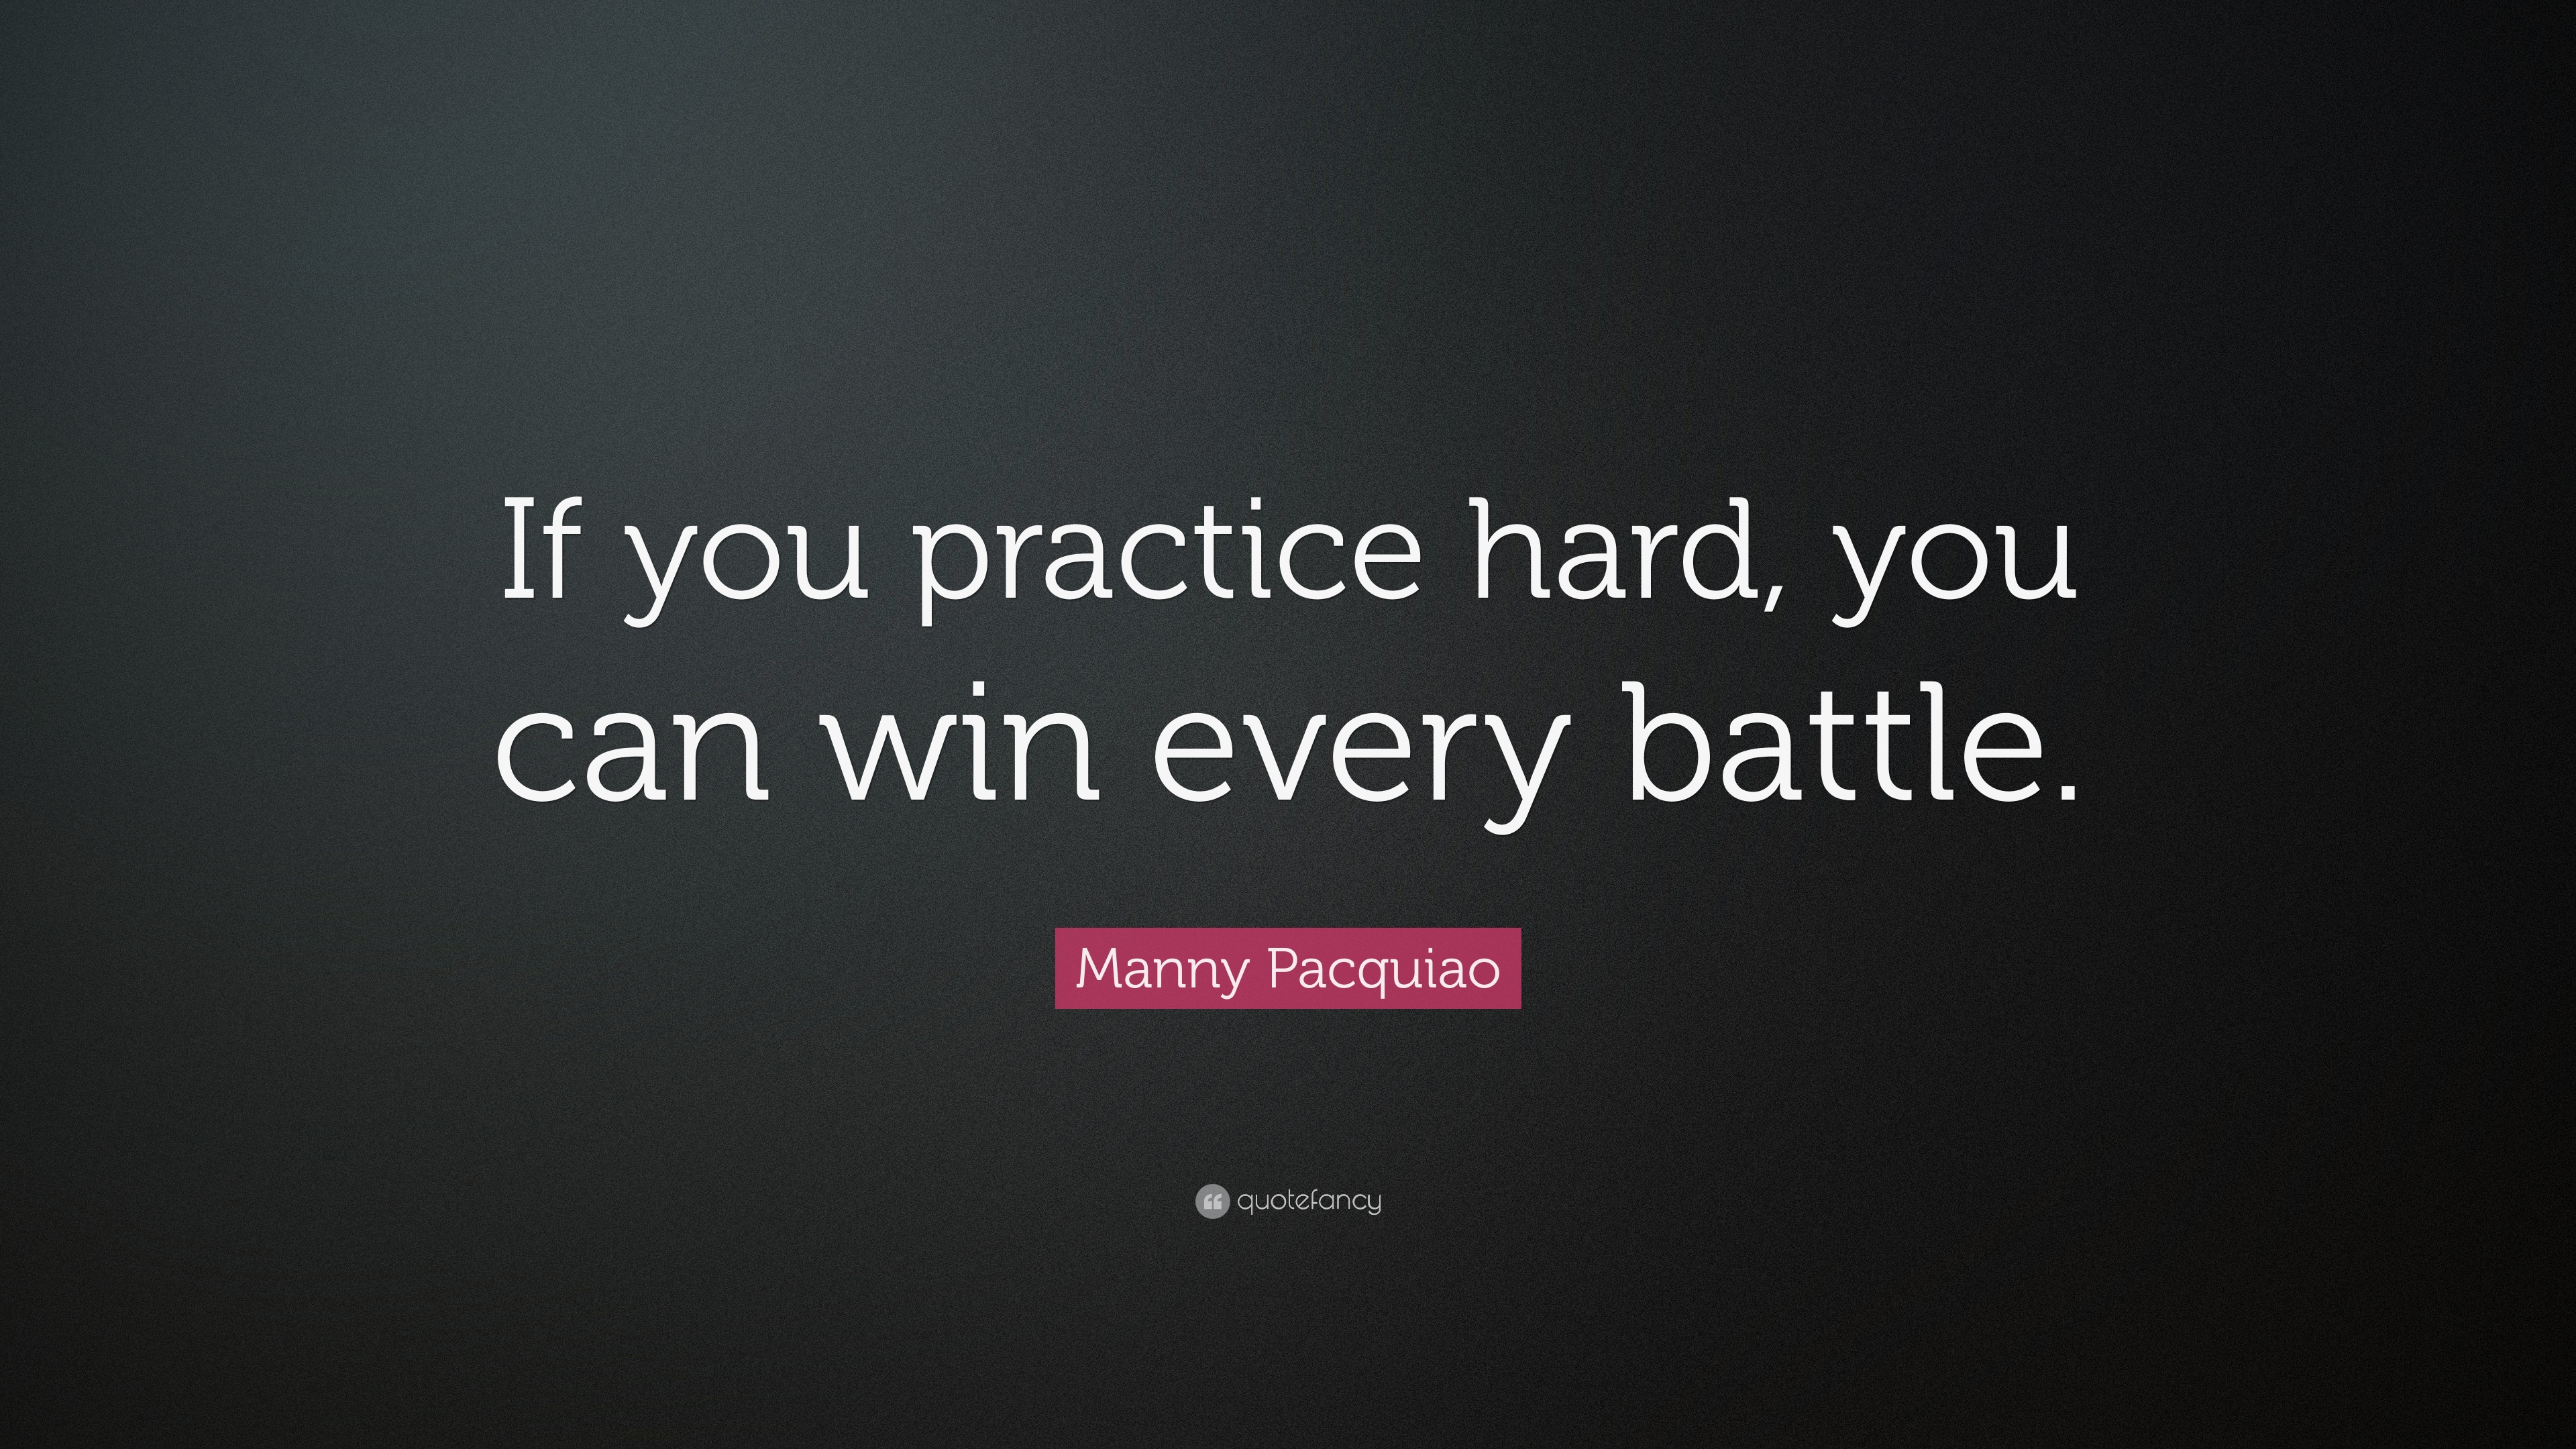 If you practice hard, you can win every battle. Manny Pacquiao